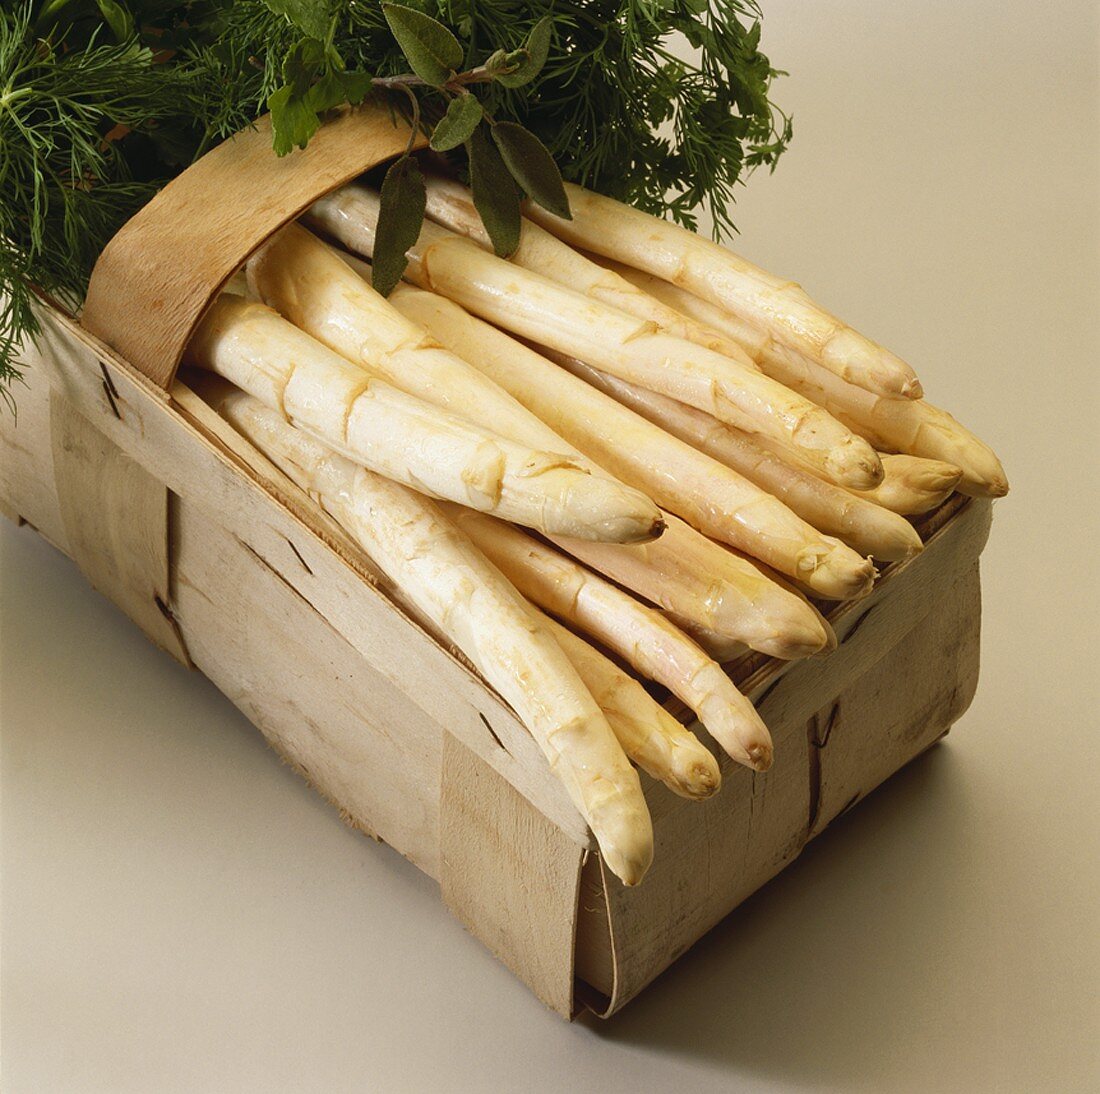 White asparagus and fresh herbs in woodchip basket